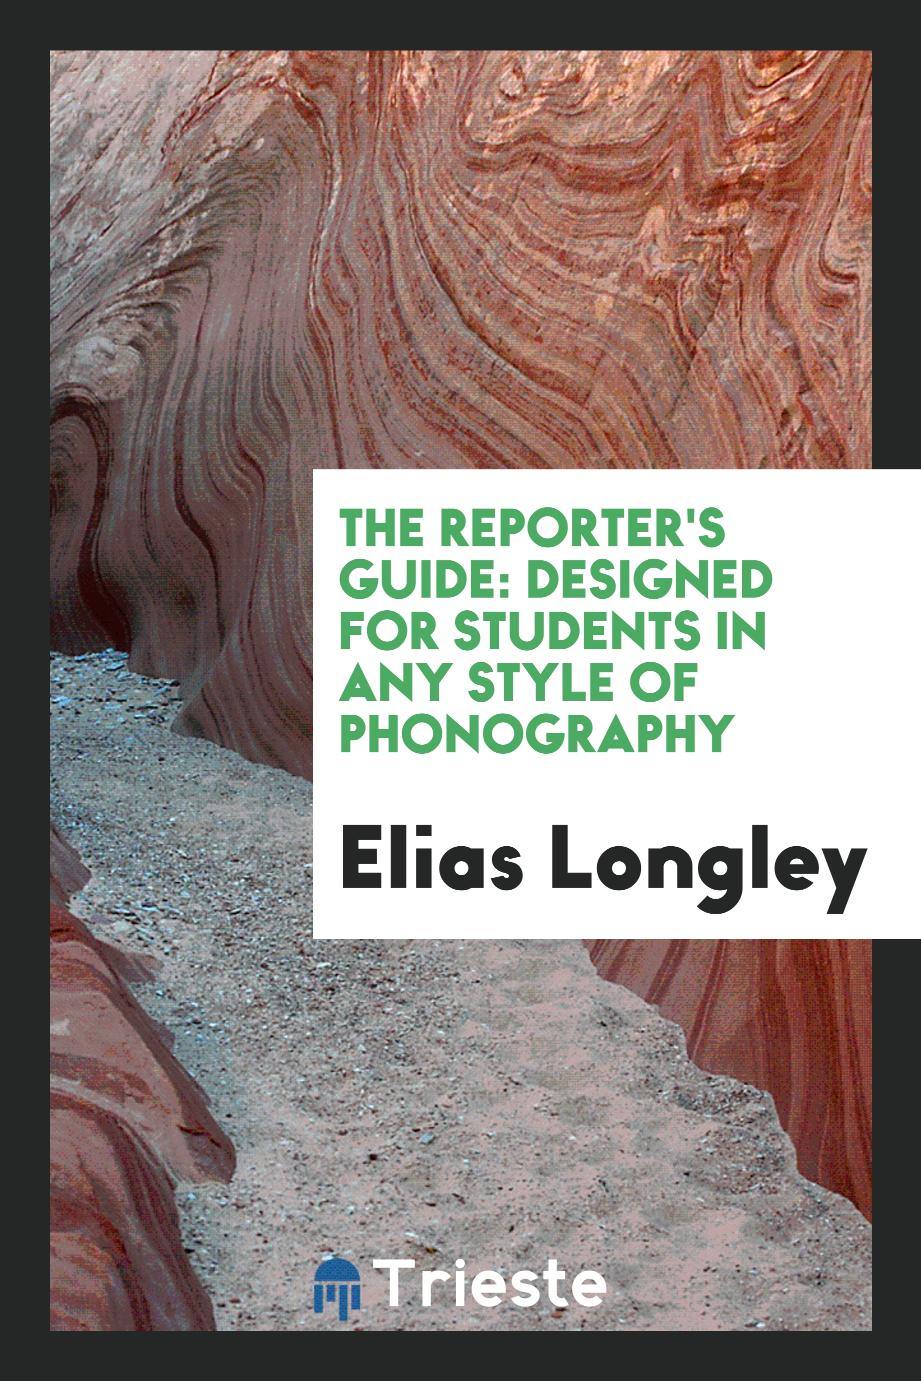 The reporter's guide: designed for students in any style of phonography